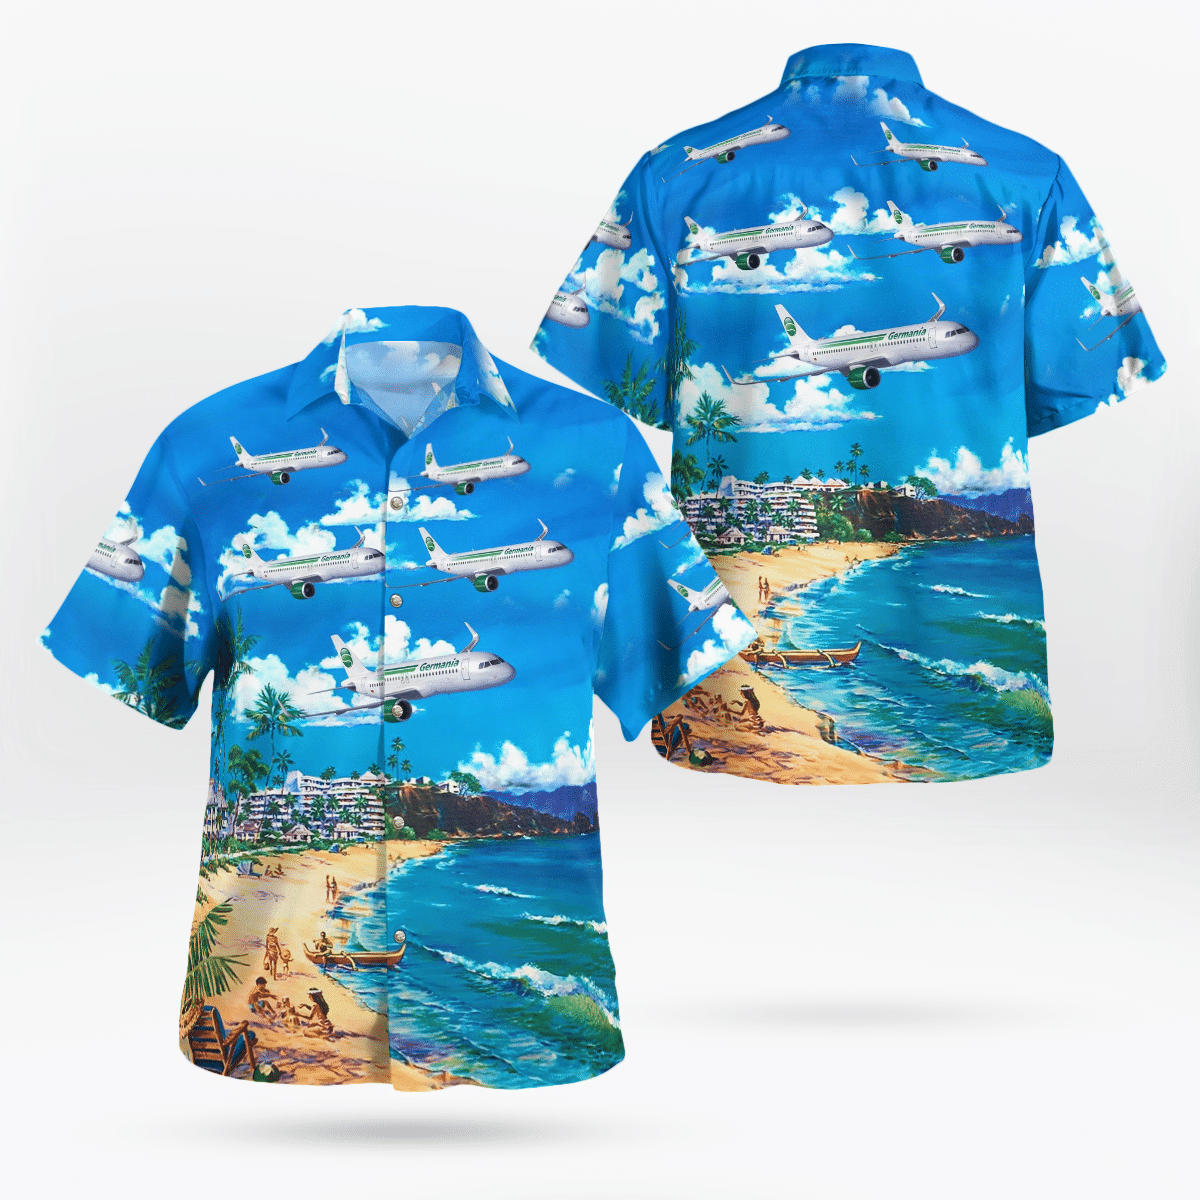 HOT Germania airline Airbus A320neo Tropical Shirt2